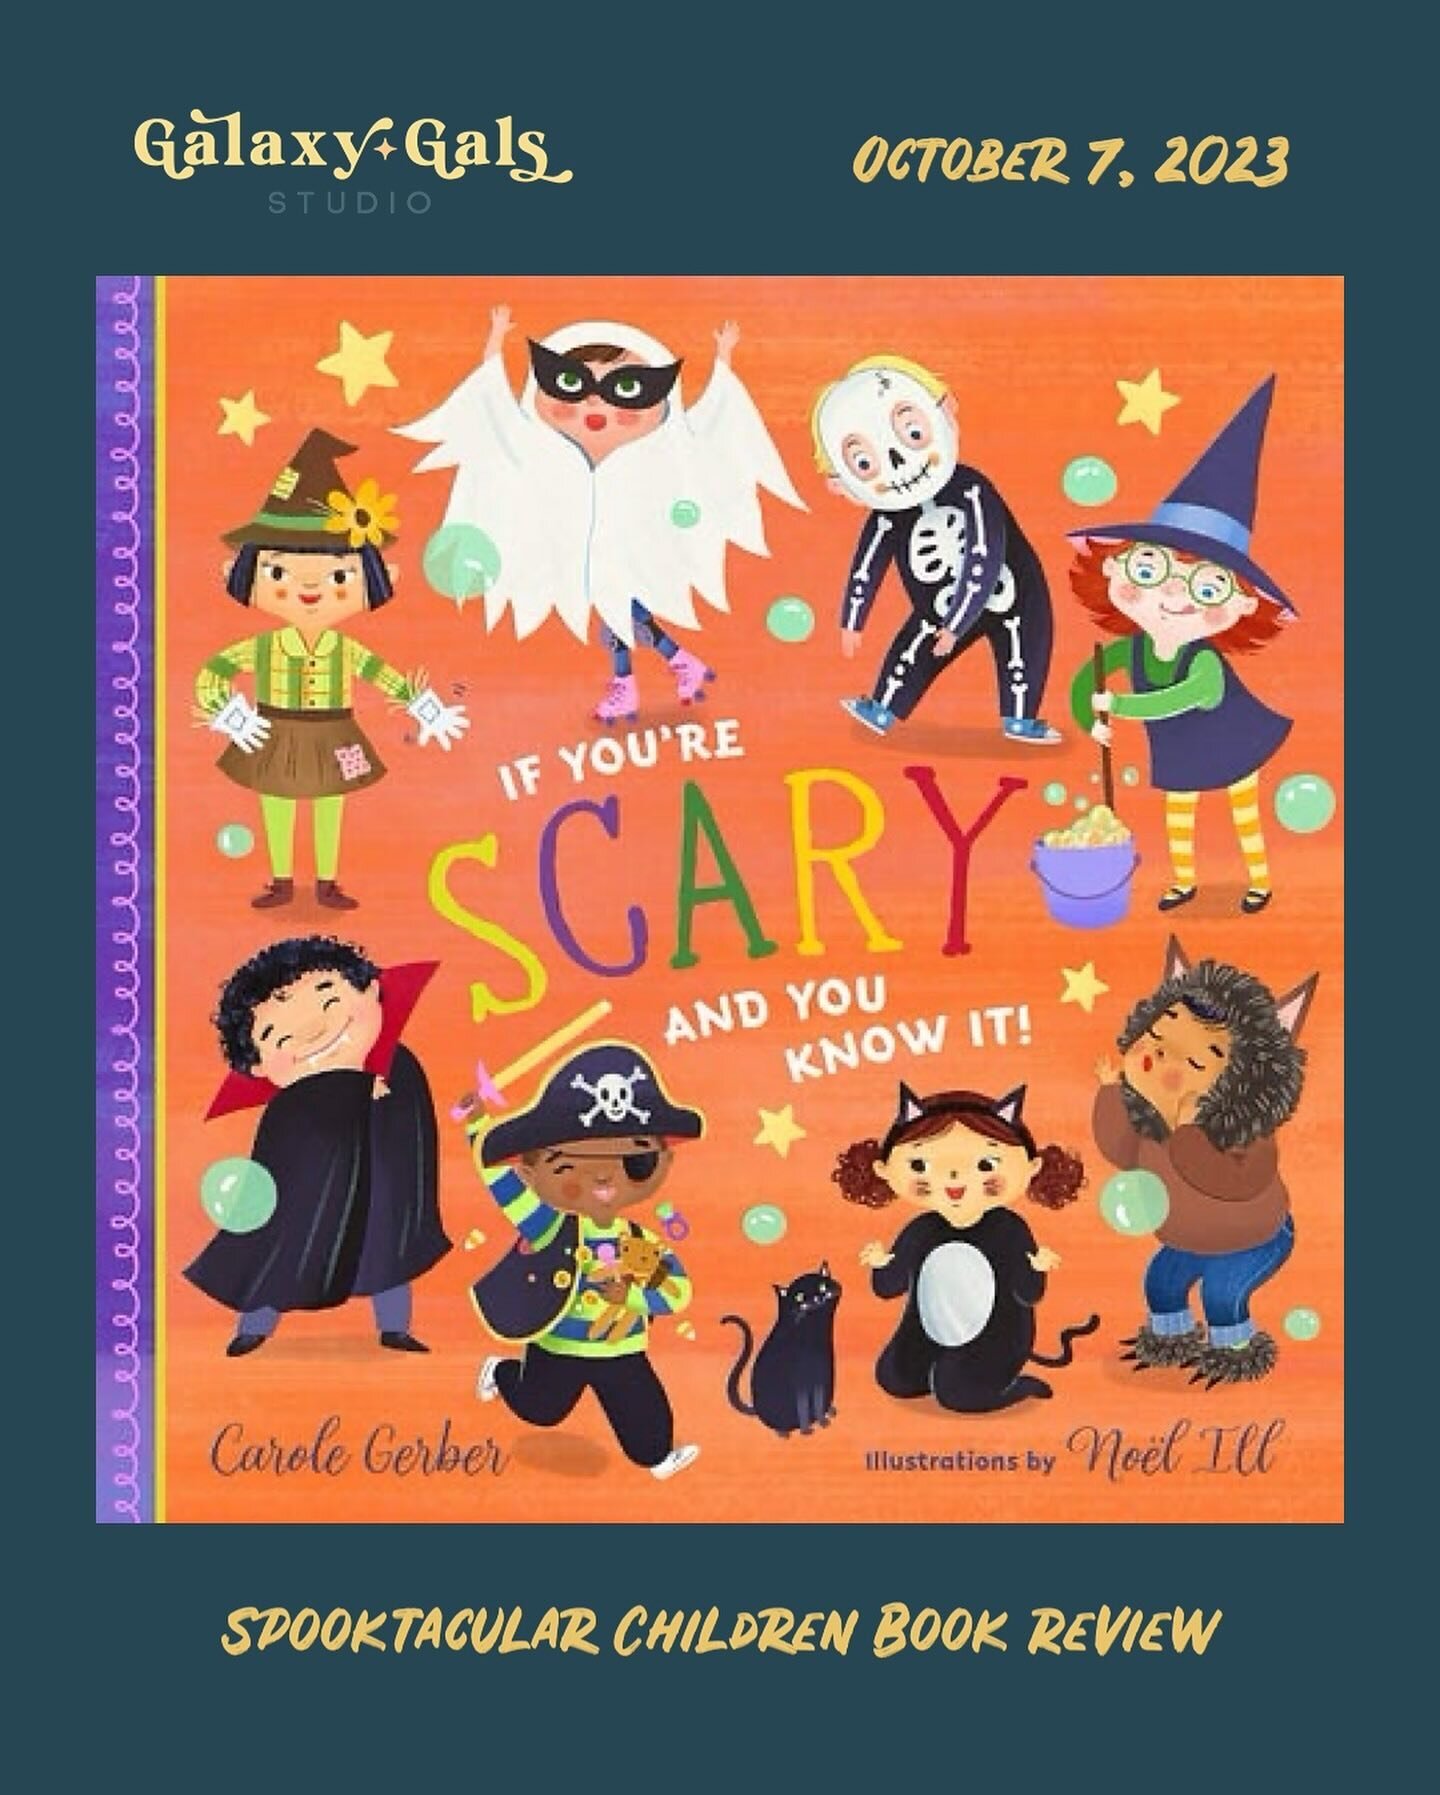 For the full review of If You&rsquo;re Scary And You Know It! Visit our newsletter link in our bio. 

Welcome to our Spooktacular Reads! We are celebrating my favorite holiday by reviewing Halloween and other spooky/fall-themed children&rsquo;s books